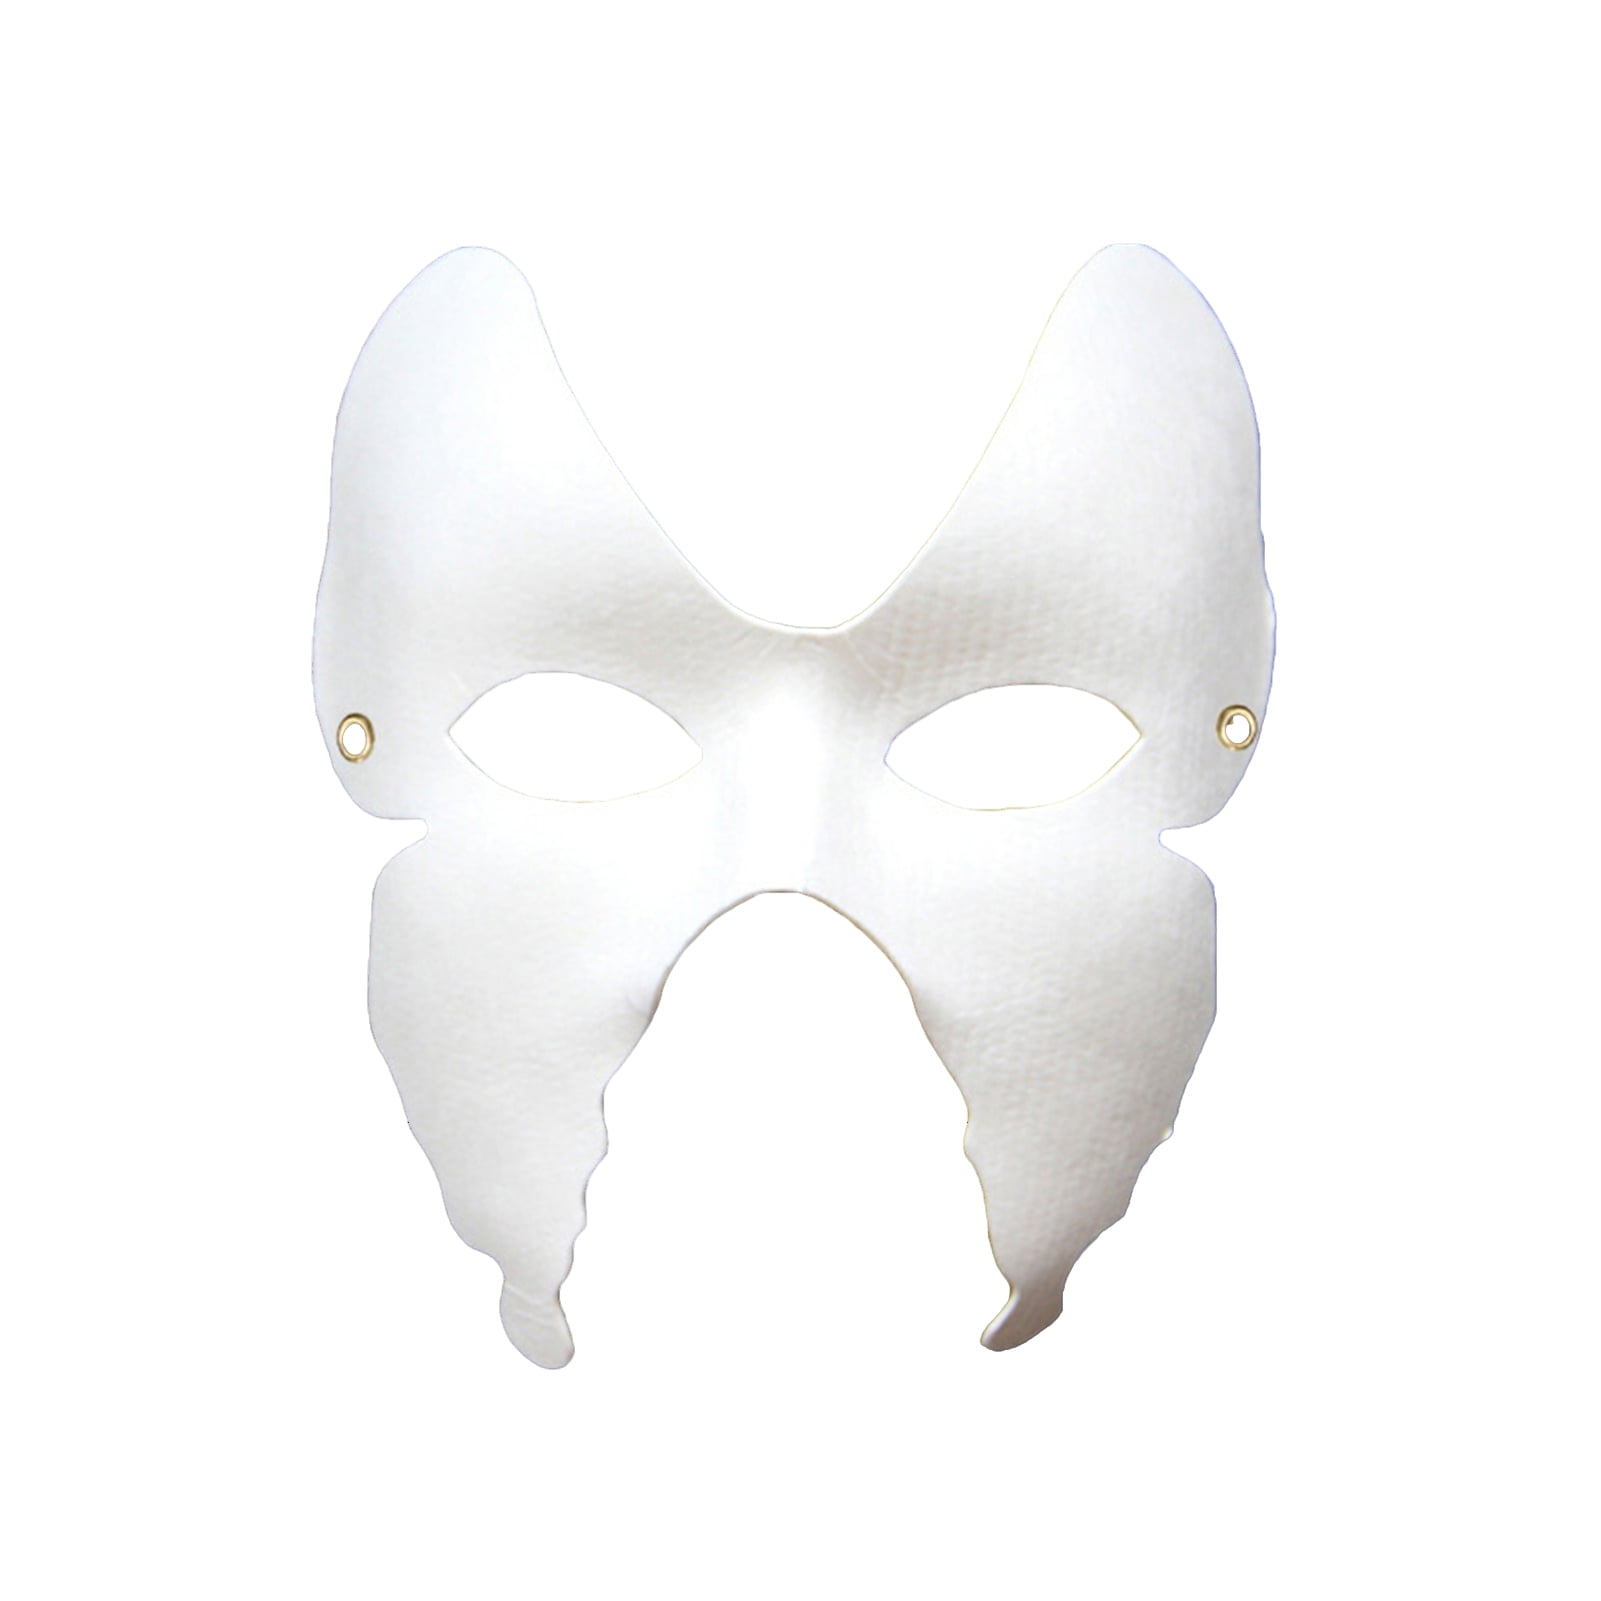 Semplice Grezzo - Blank White Sweetheart Masks to Decorate